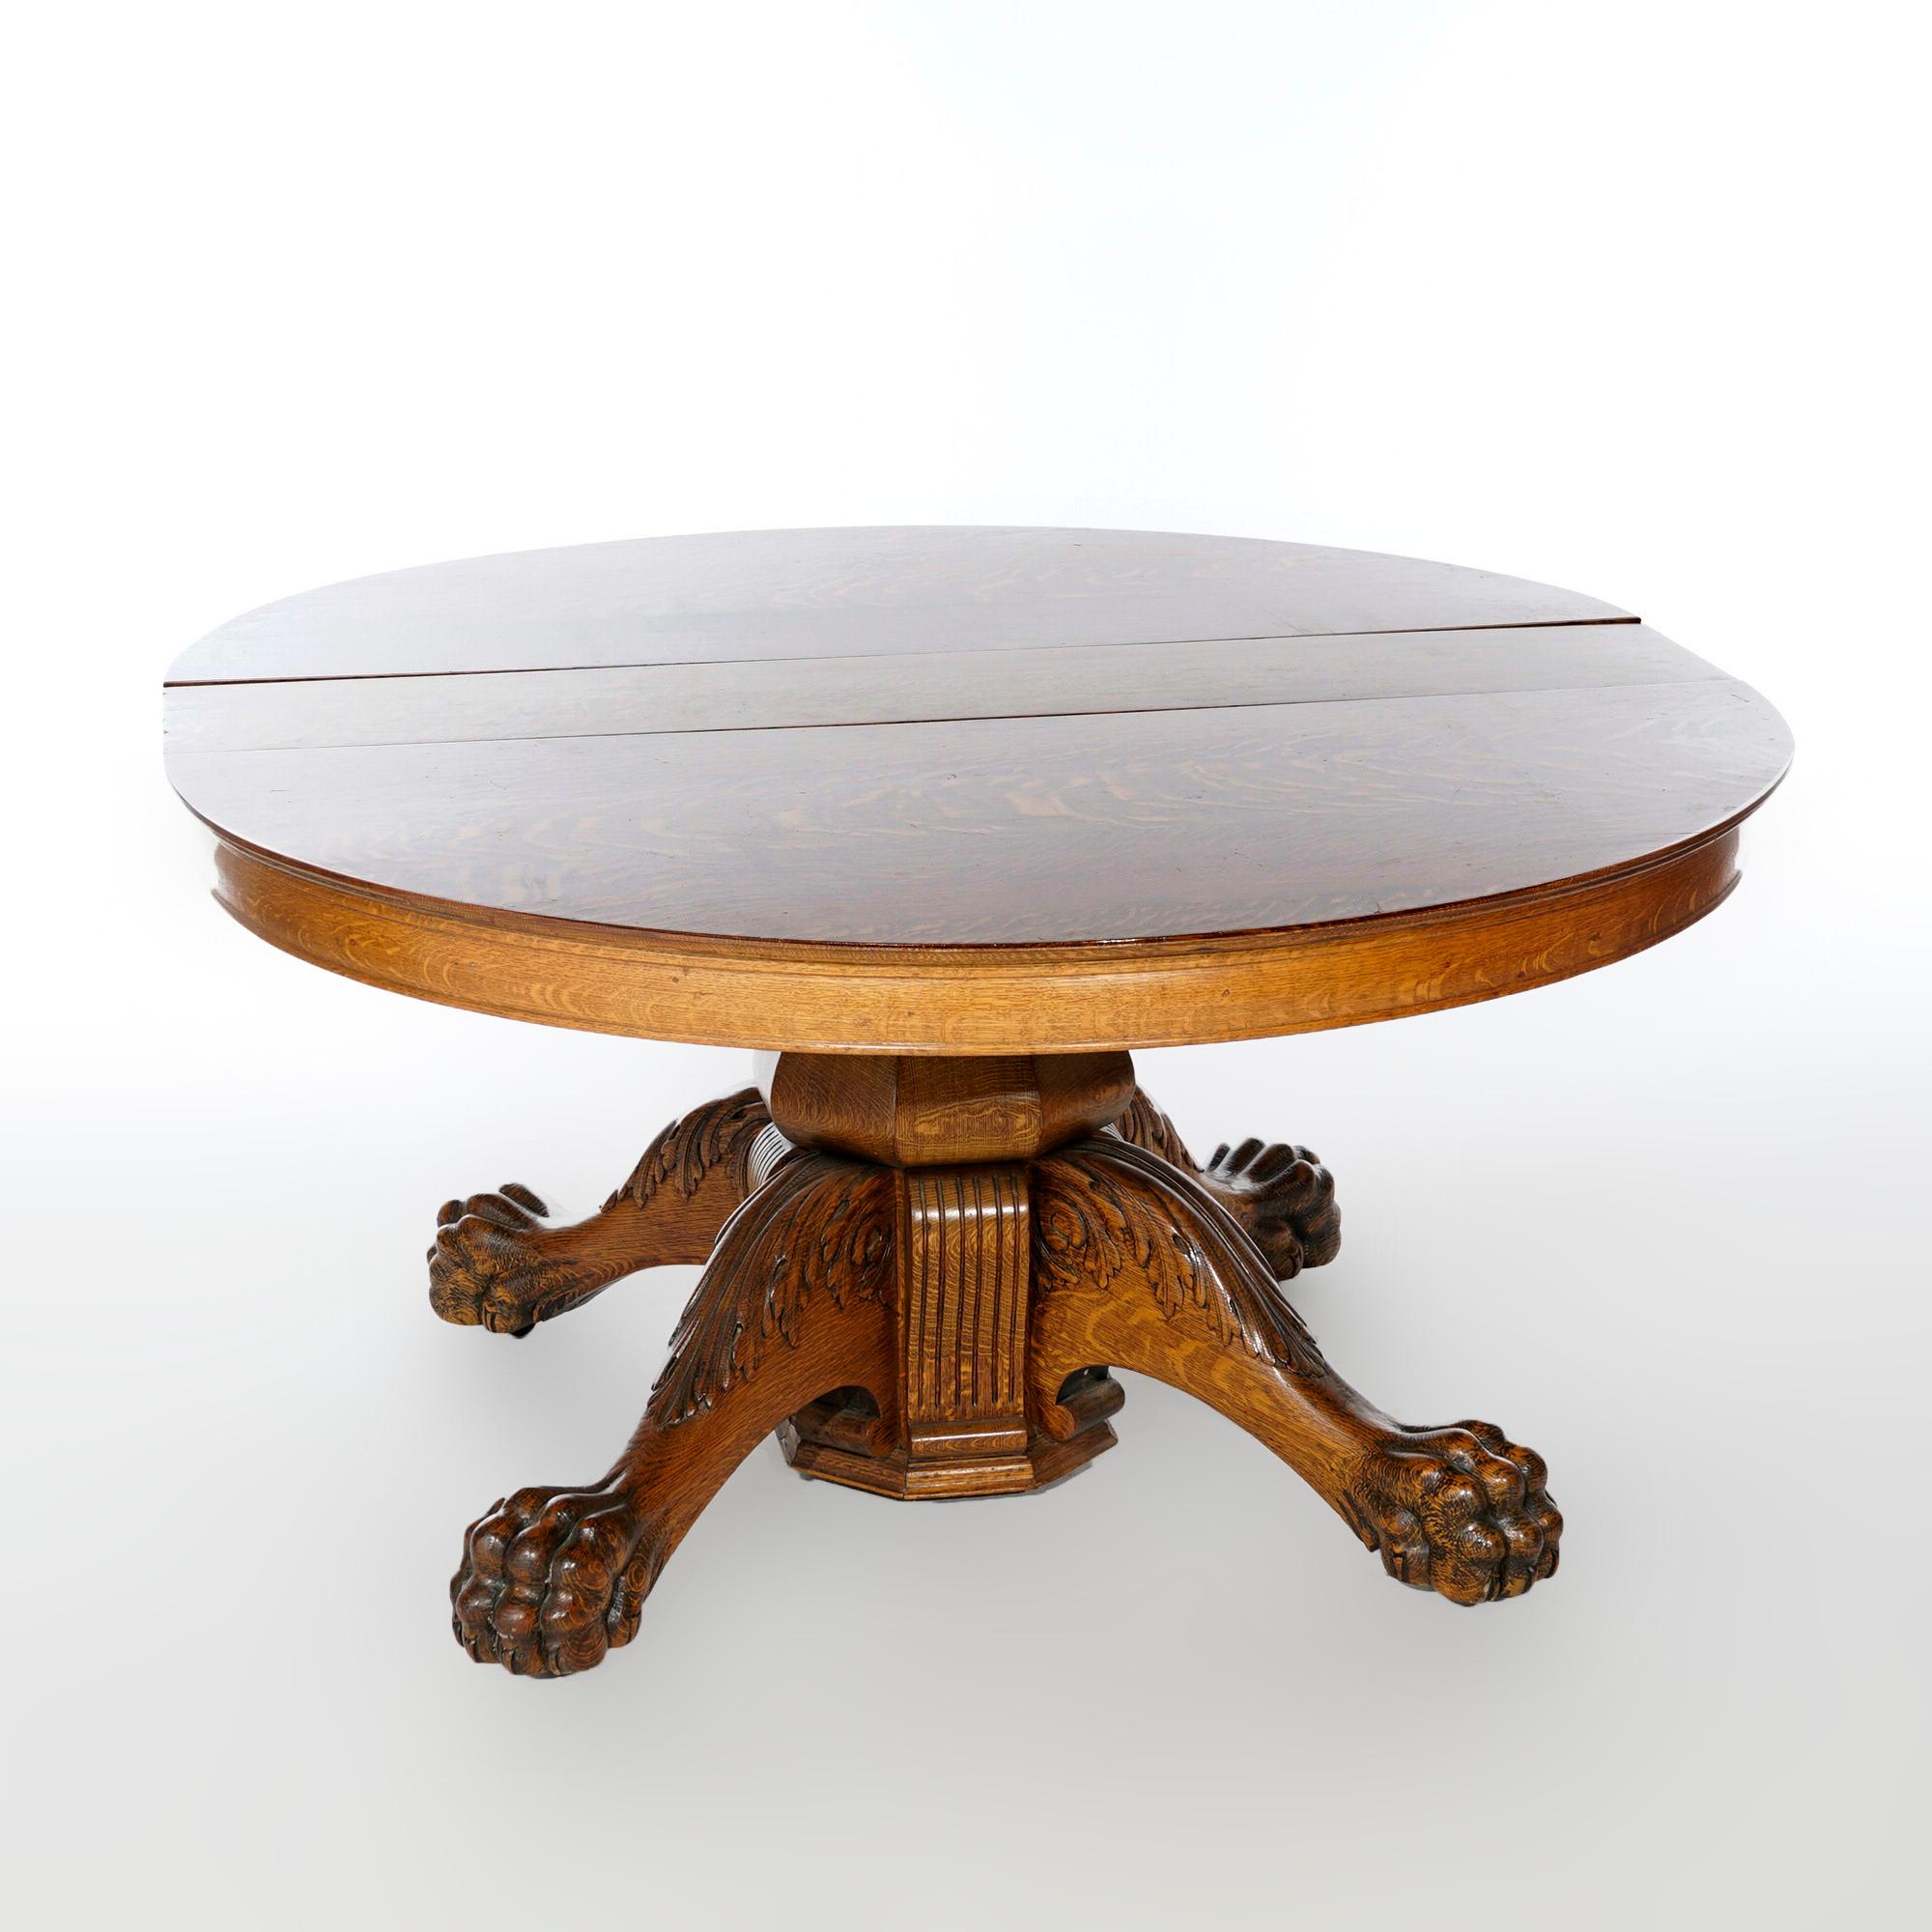 20th Century Antique Round Carved Oak Claw Foot Extension Dining Table & Three Leaves, C1910